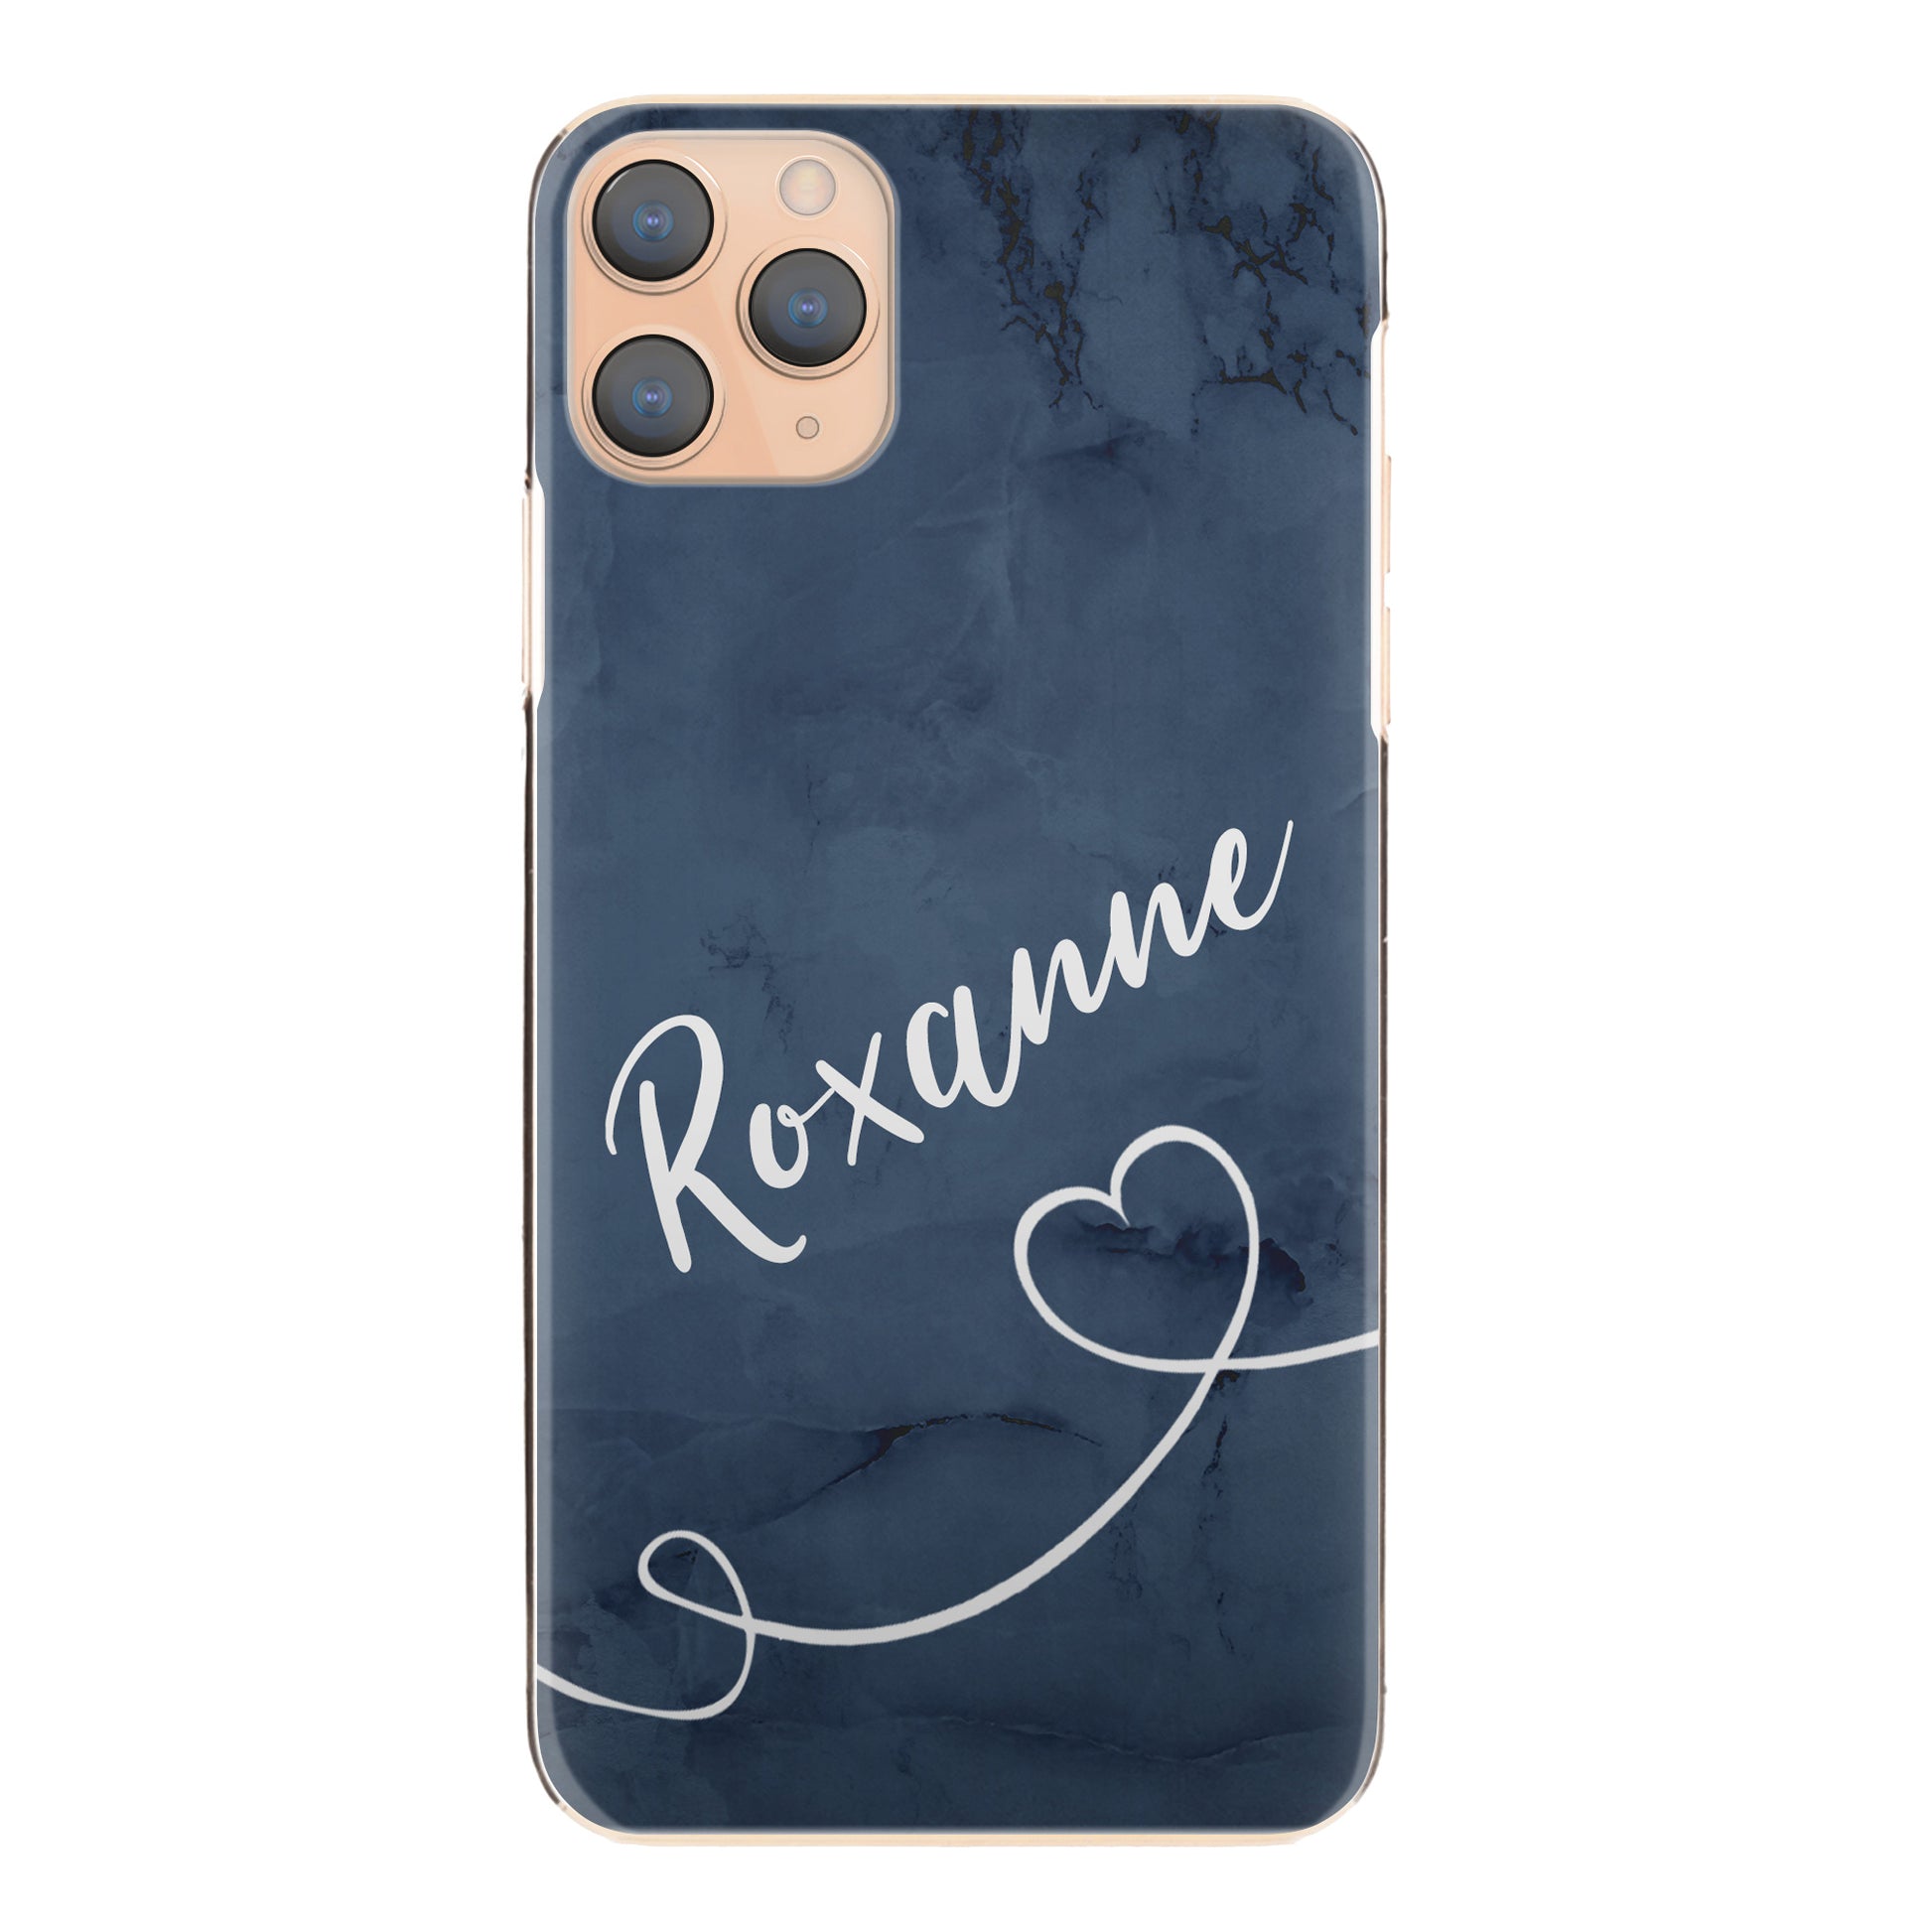 Personalised HTC Phone Hard Case with Stylish Text and Heart Line on Blue Marble